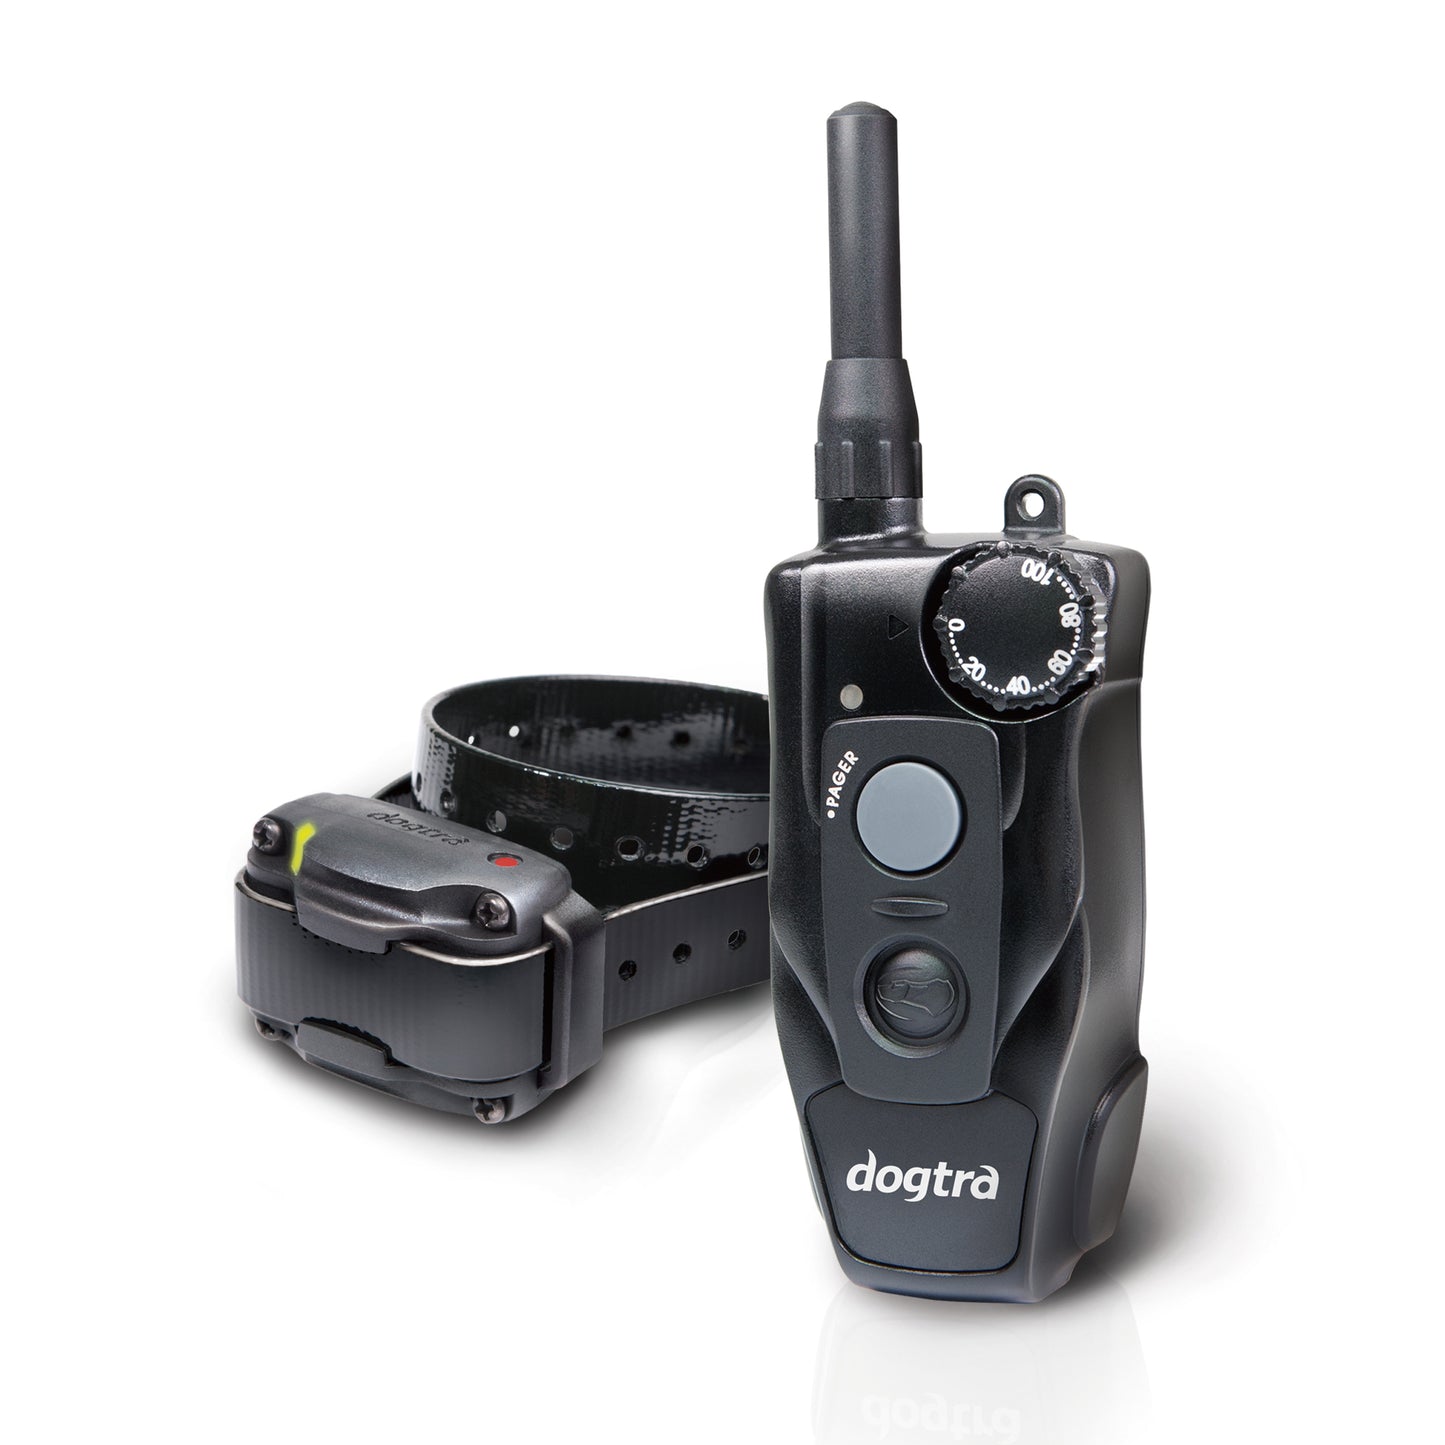 Dogtra 200C – Waterproof ½-Mile One-Handed Operation Remote Training Dog E-Collar